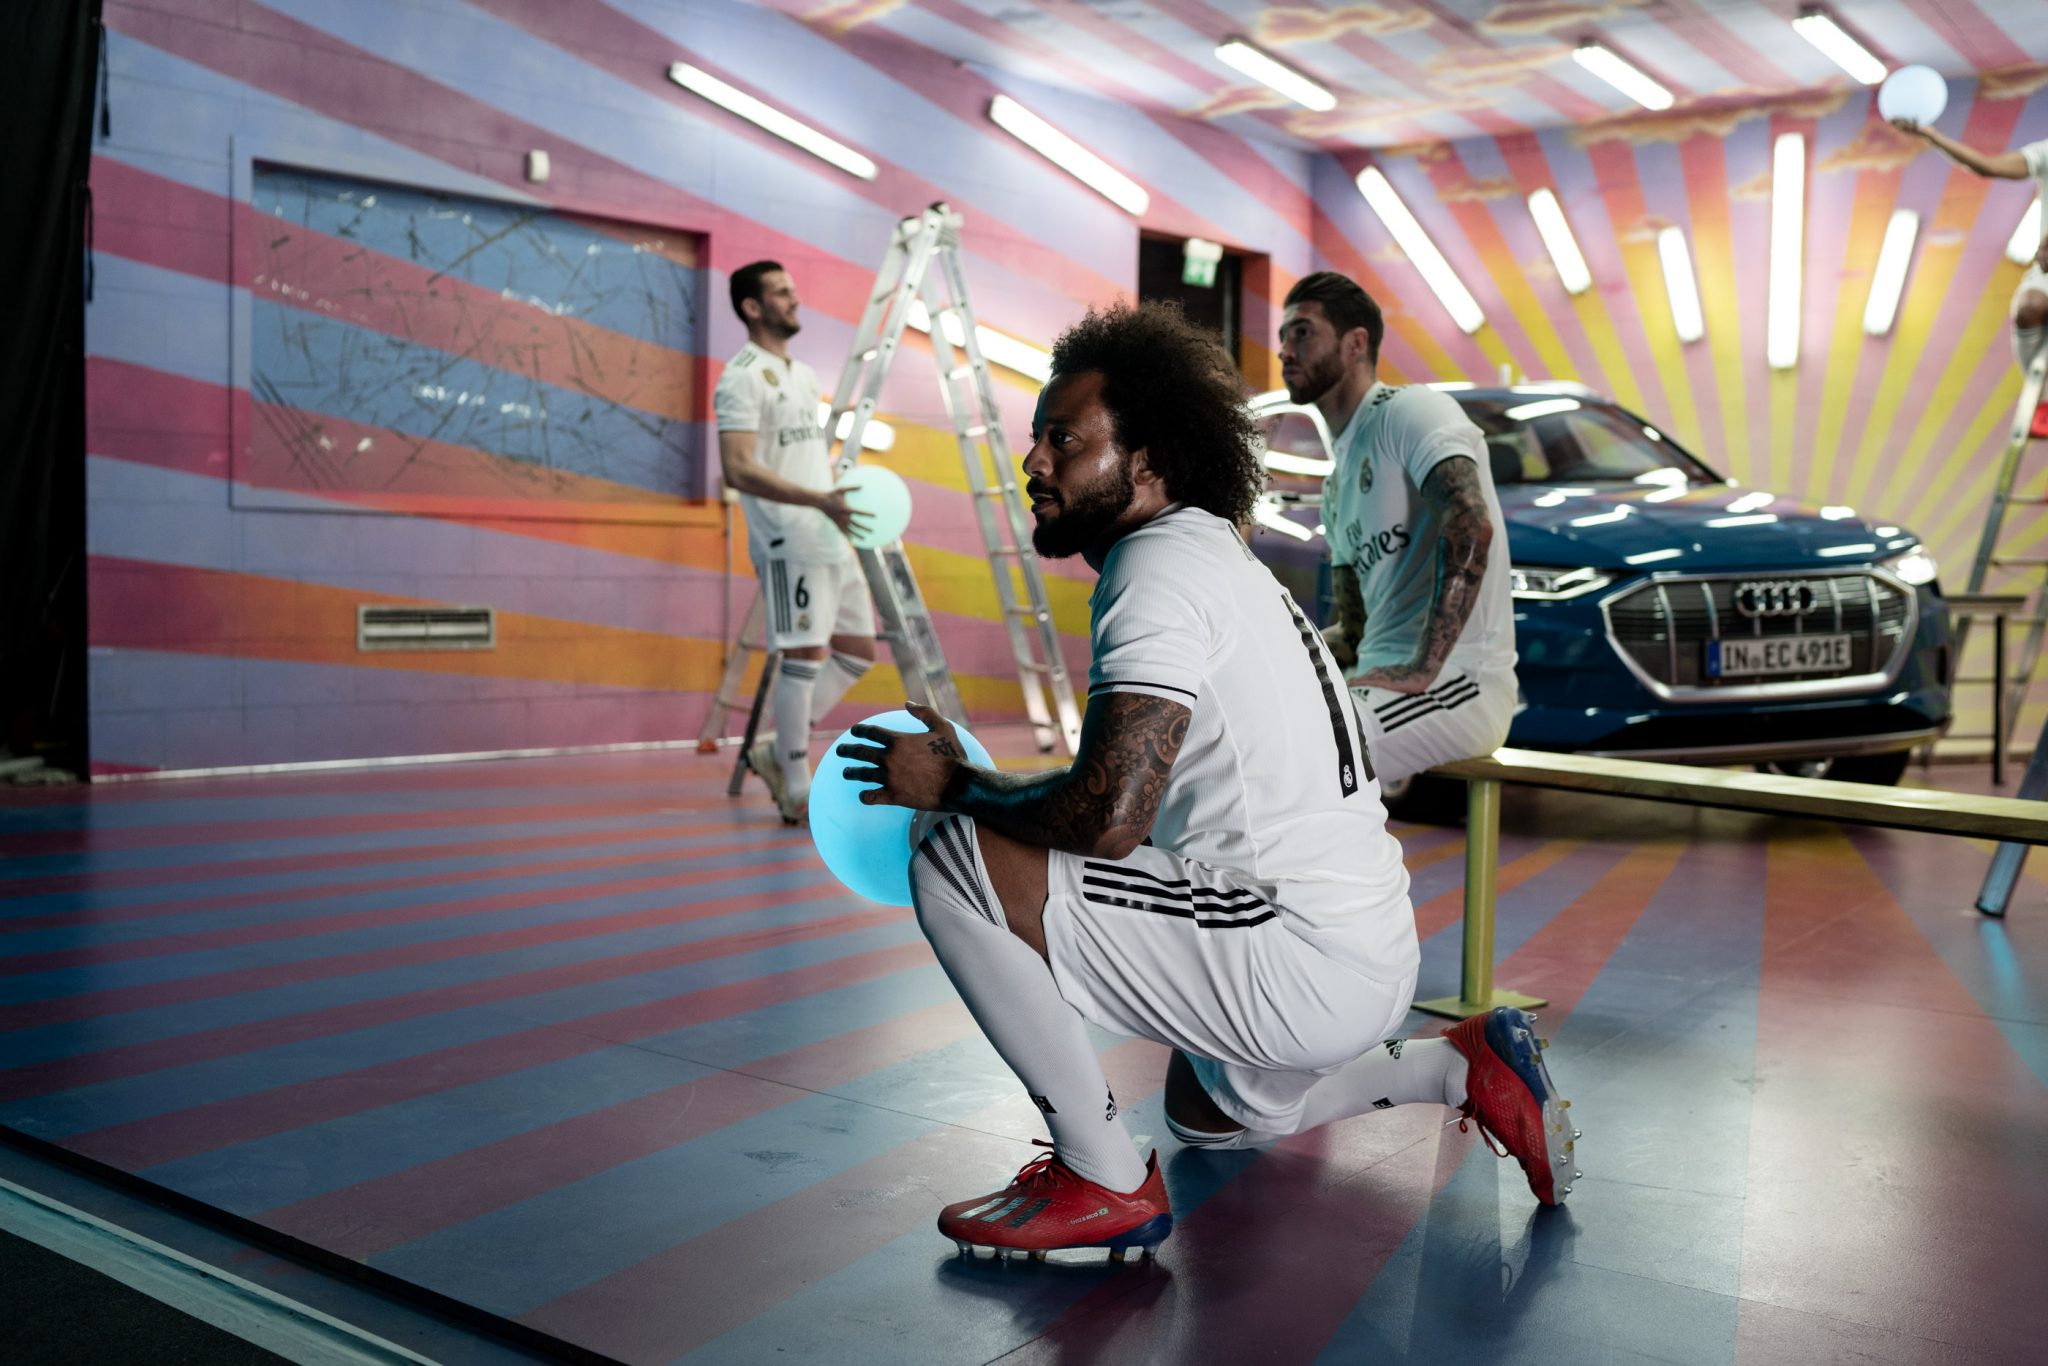 David LaChapelle | Audi x Real Madrid | Behind-the-scenes photographs from the Audi E-tron launch shoot in Madrid. | 17